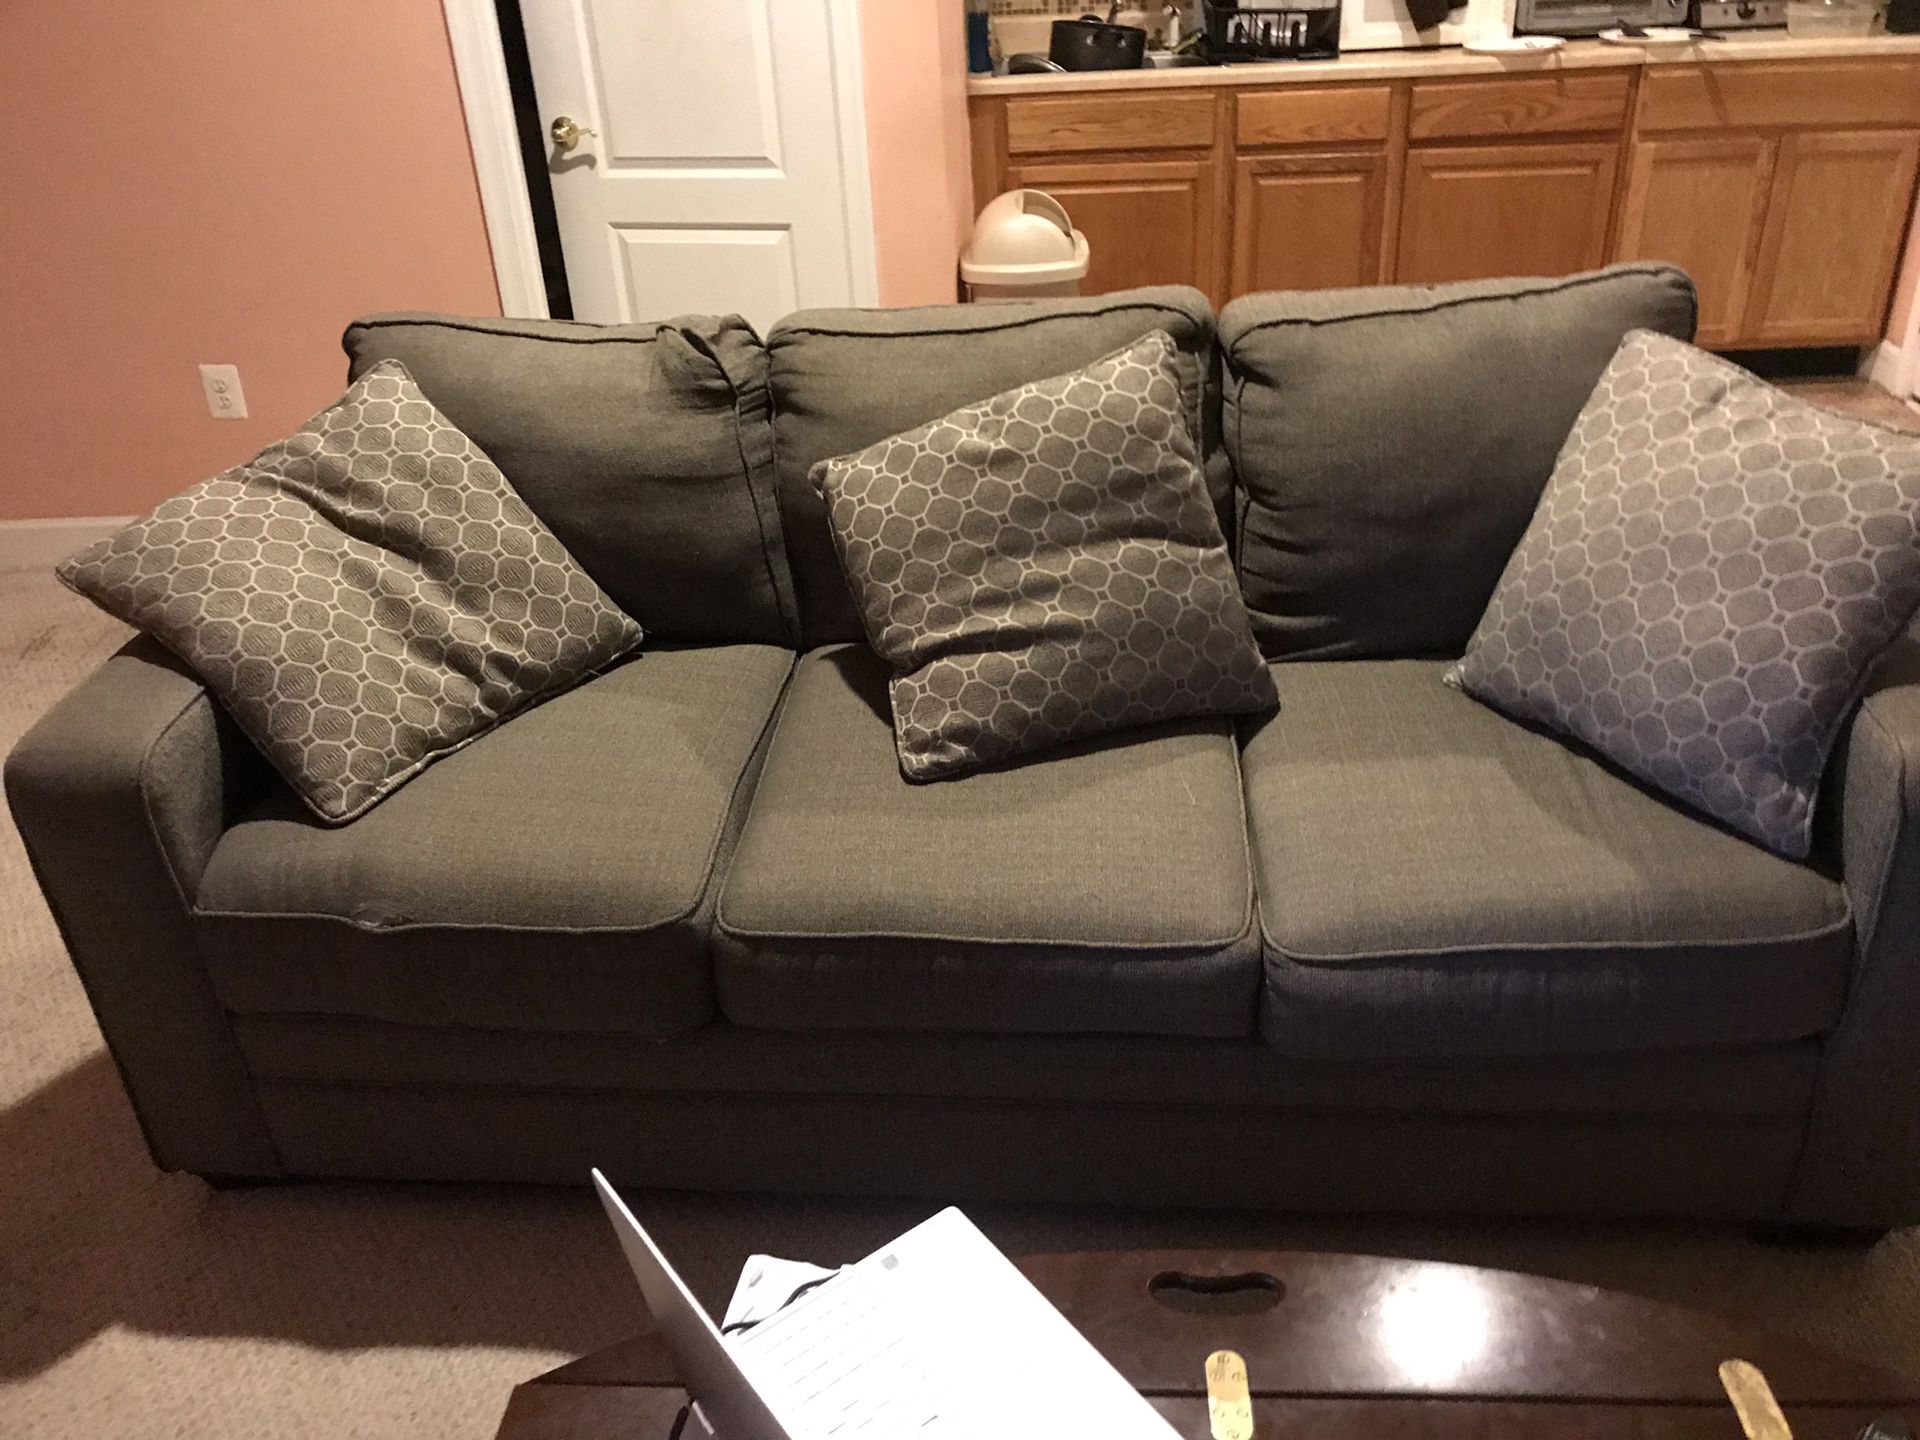 Furniture, used ( good conditions )